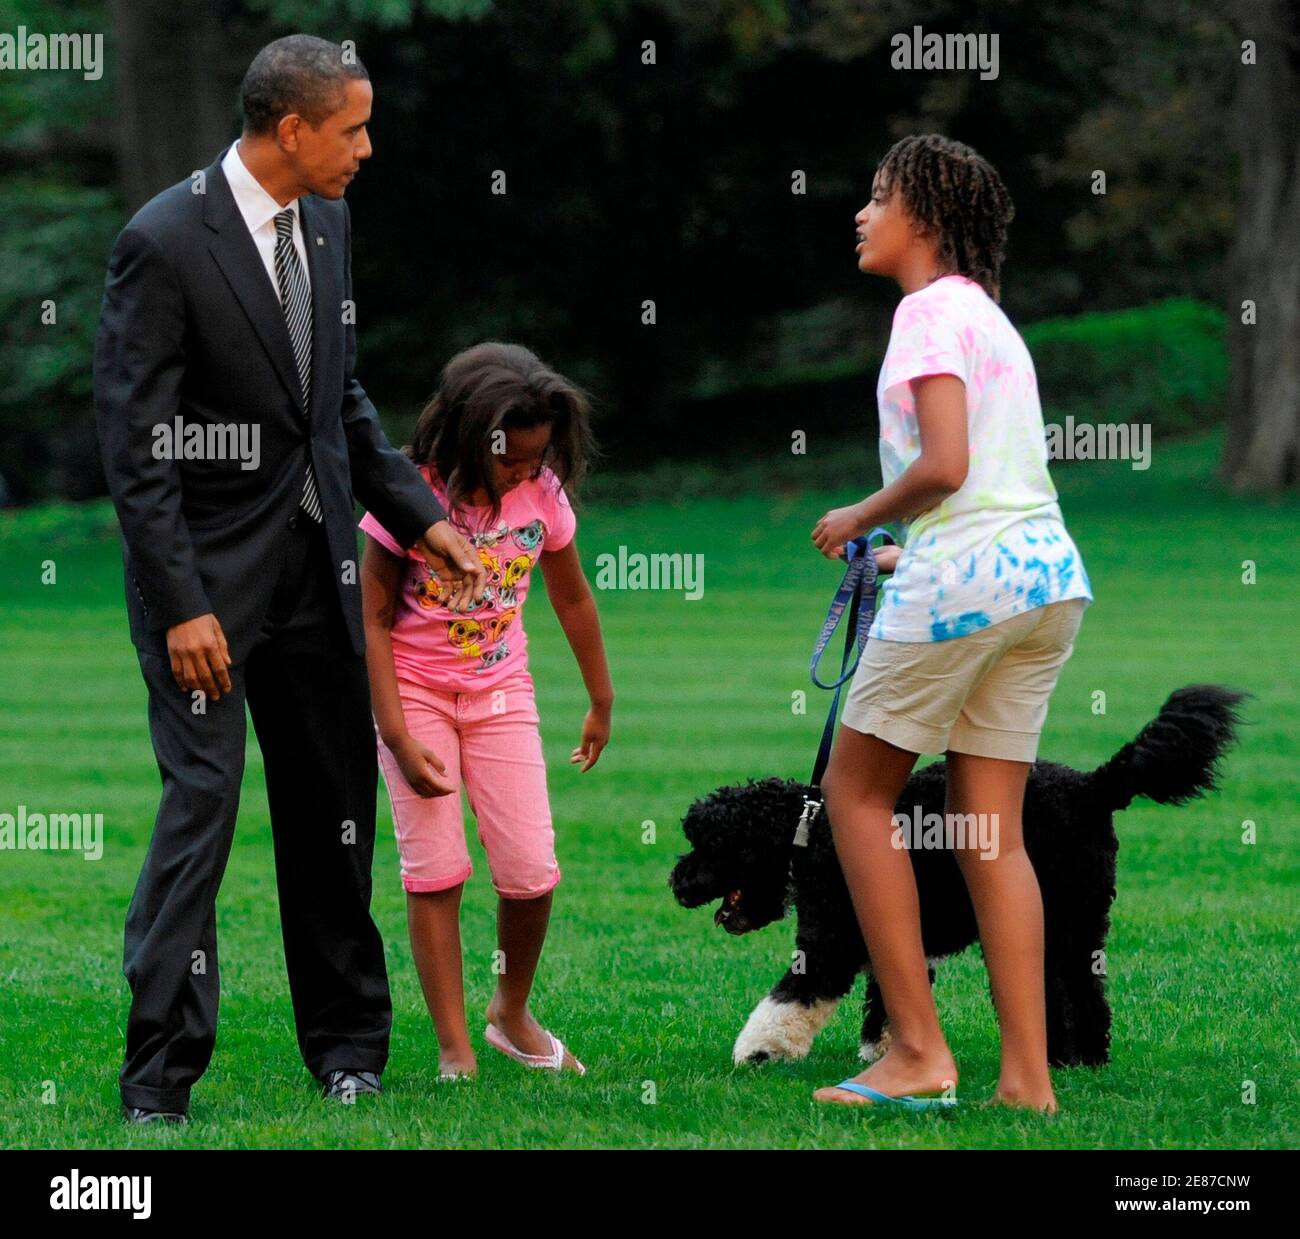 U.S. President Barack Obama is welcomed by his daughters Sasha (L) and Malia and their dog Bo on his return to Washington after a day trip to Ohio and Pennsylvania, where he participated in economic rallies, September 15, 2009.   REUTERS/Mike Theiler (UNITED STATES POLITICS) Stock Photo